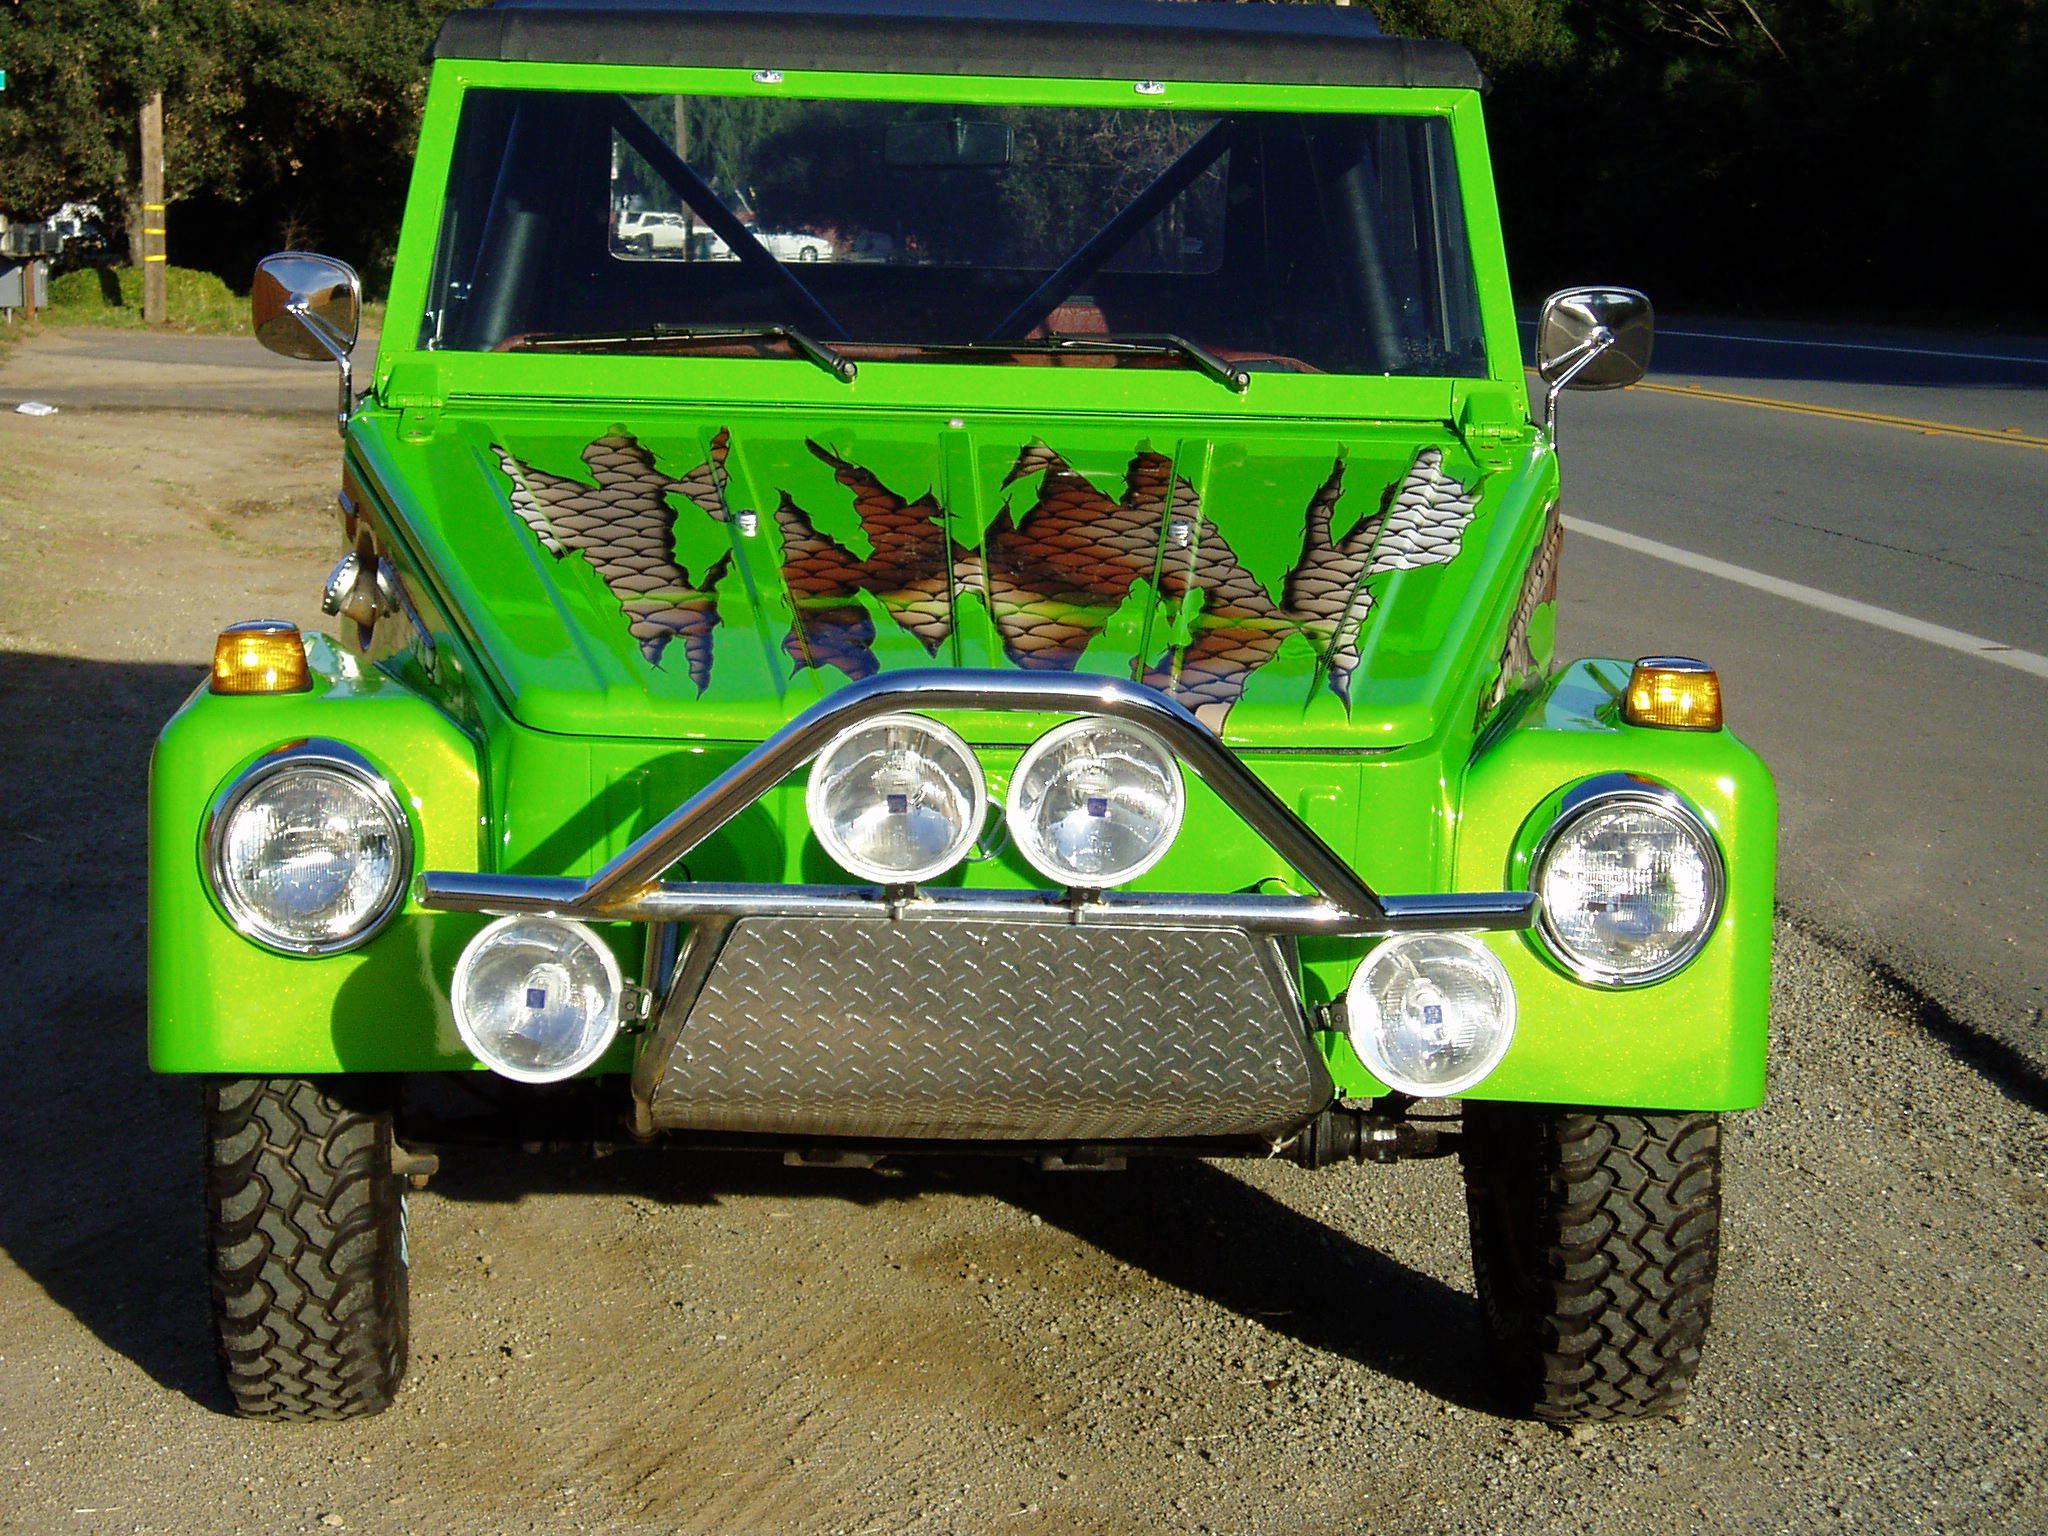 Wuppies 1973 Volkswagen Thing Specs, Photo, Modification Info at